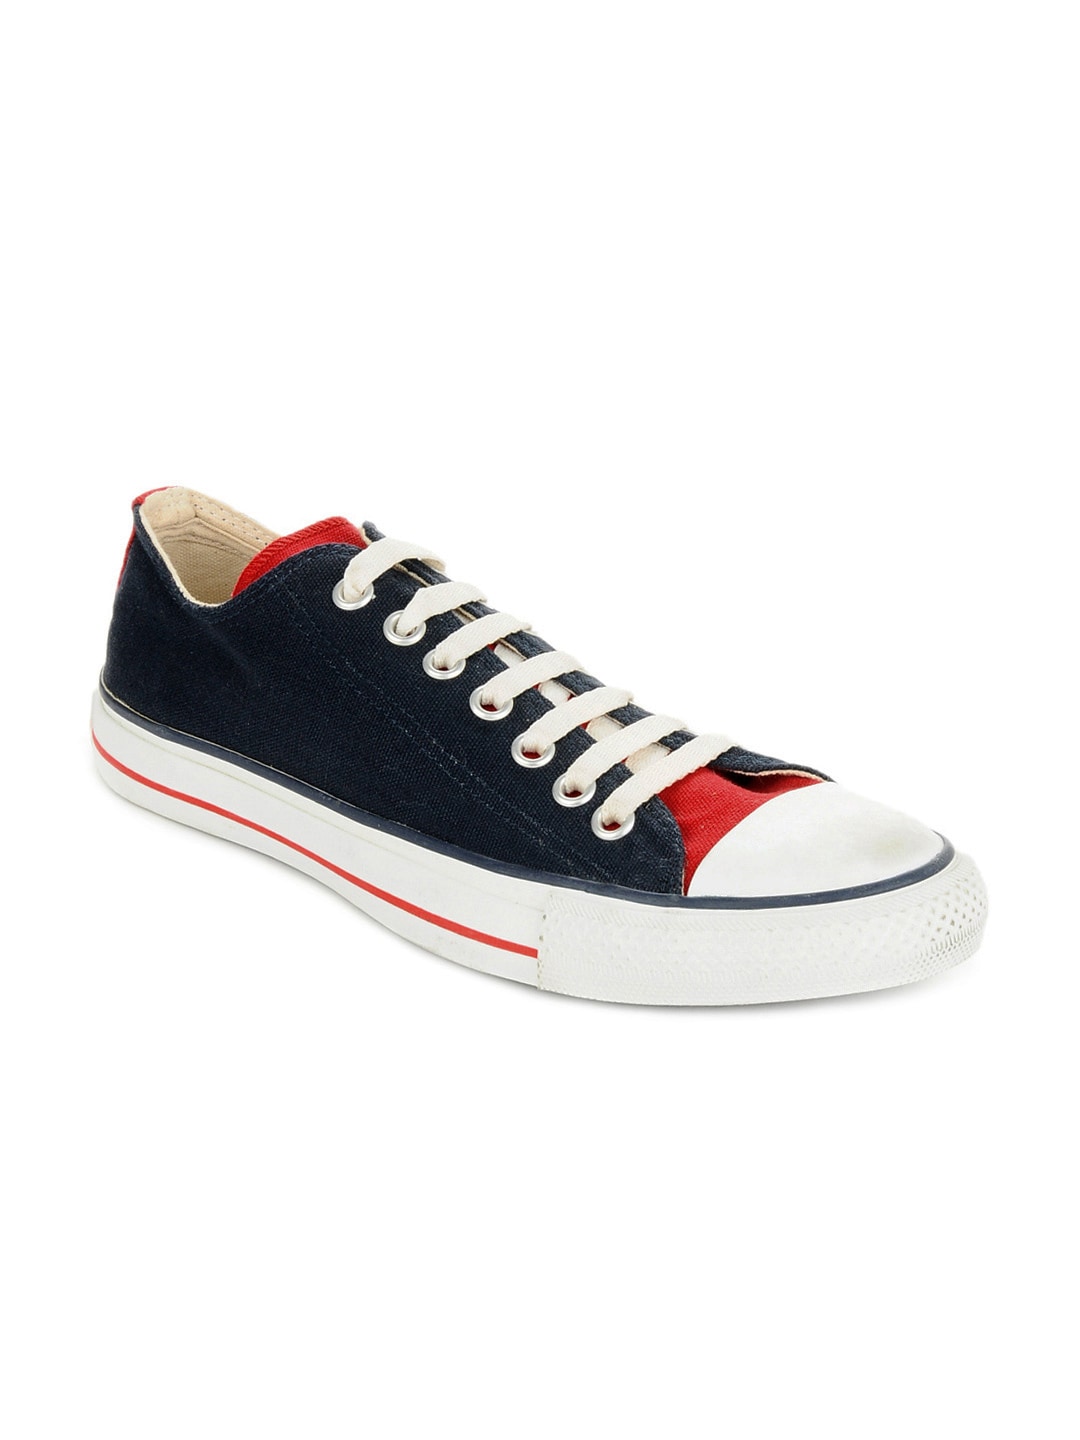 Converse Chuck Taylor All Star Unisex Navy Blue & Red Shoe